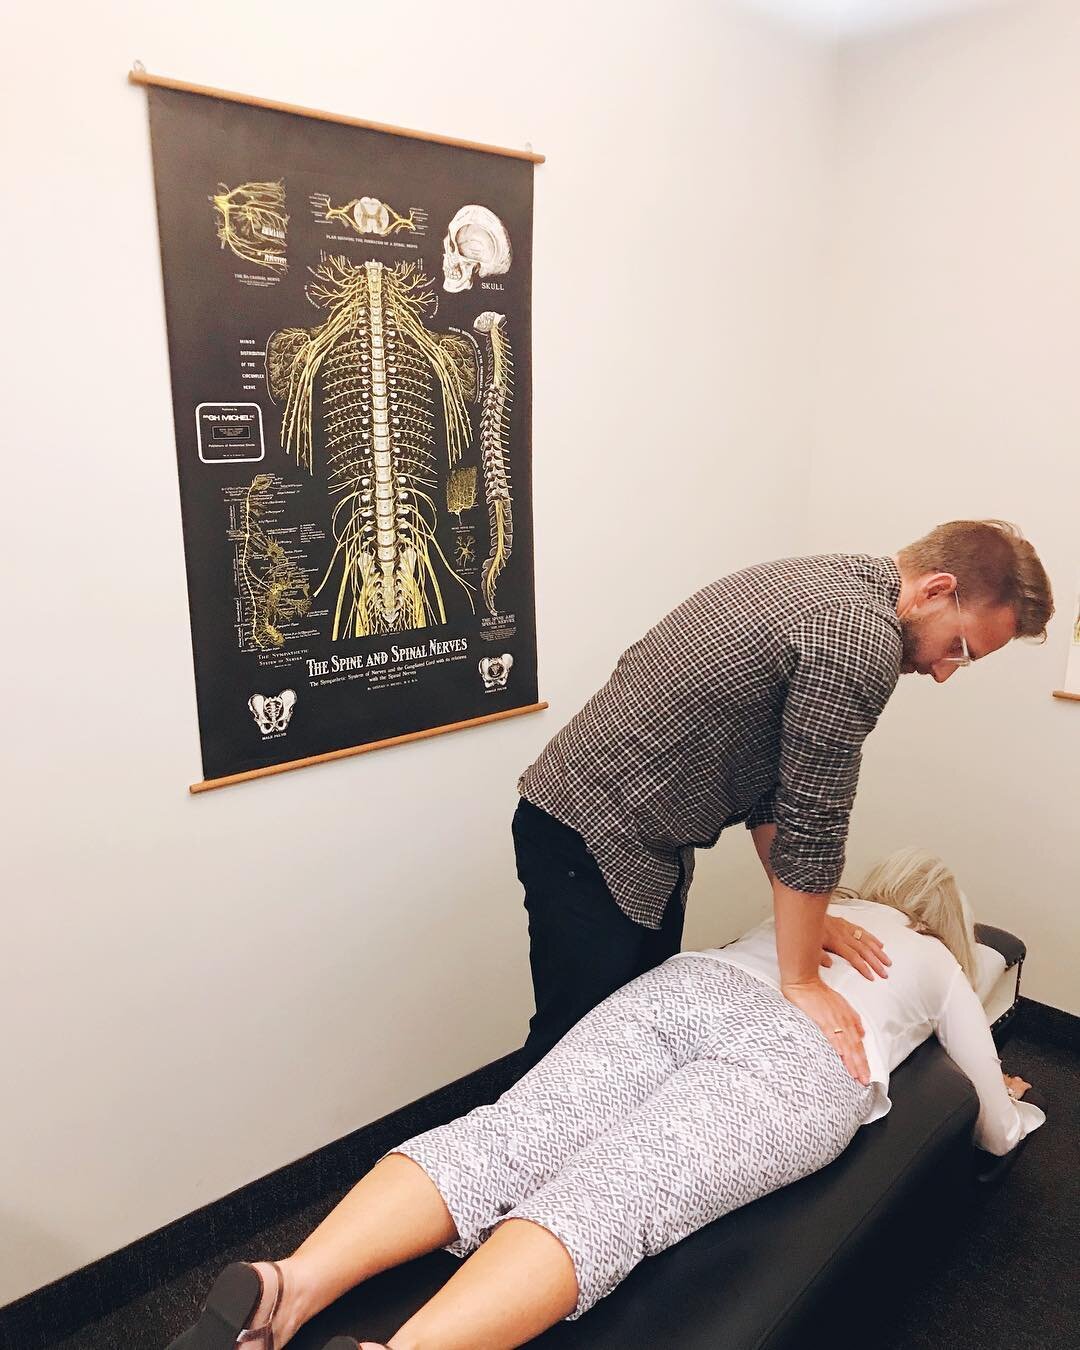 Todays the day the first chiropractic adjustment was performed in 1985. Today is also the day my lovely mother was born. I&rsquo;d say today&rsquo;s a pretty good day in the history books!